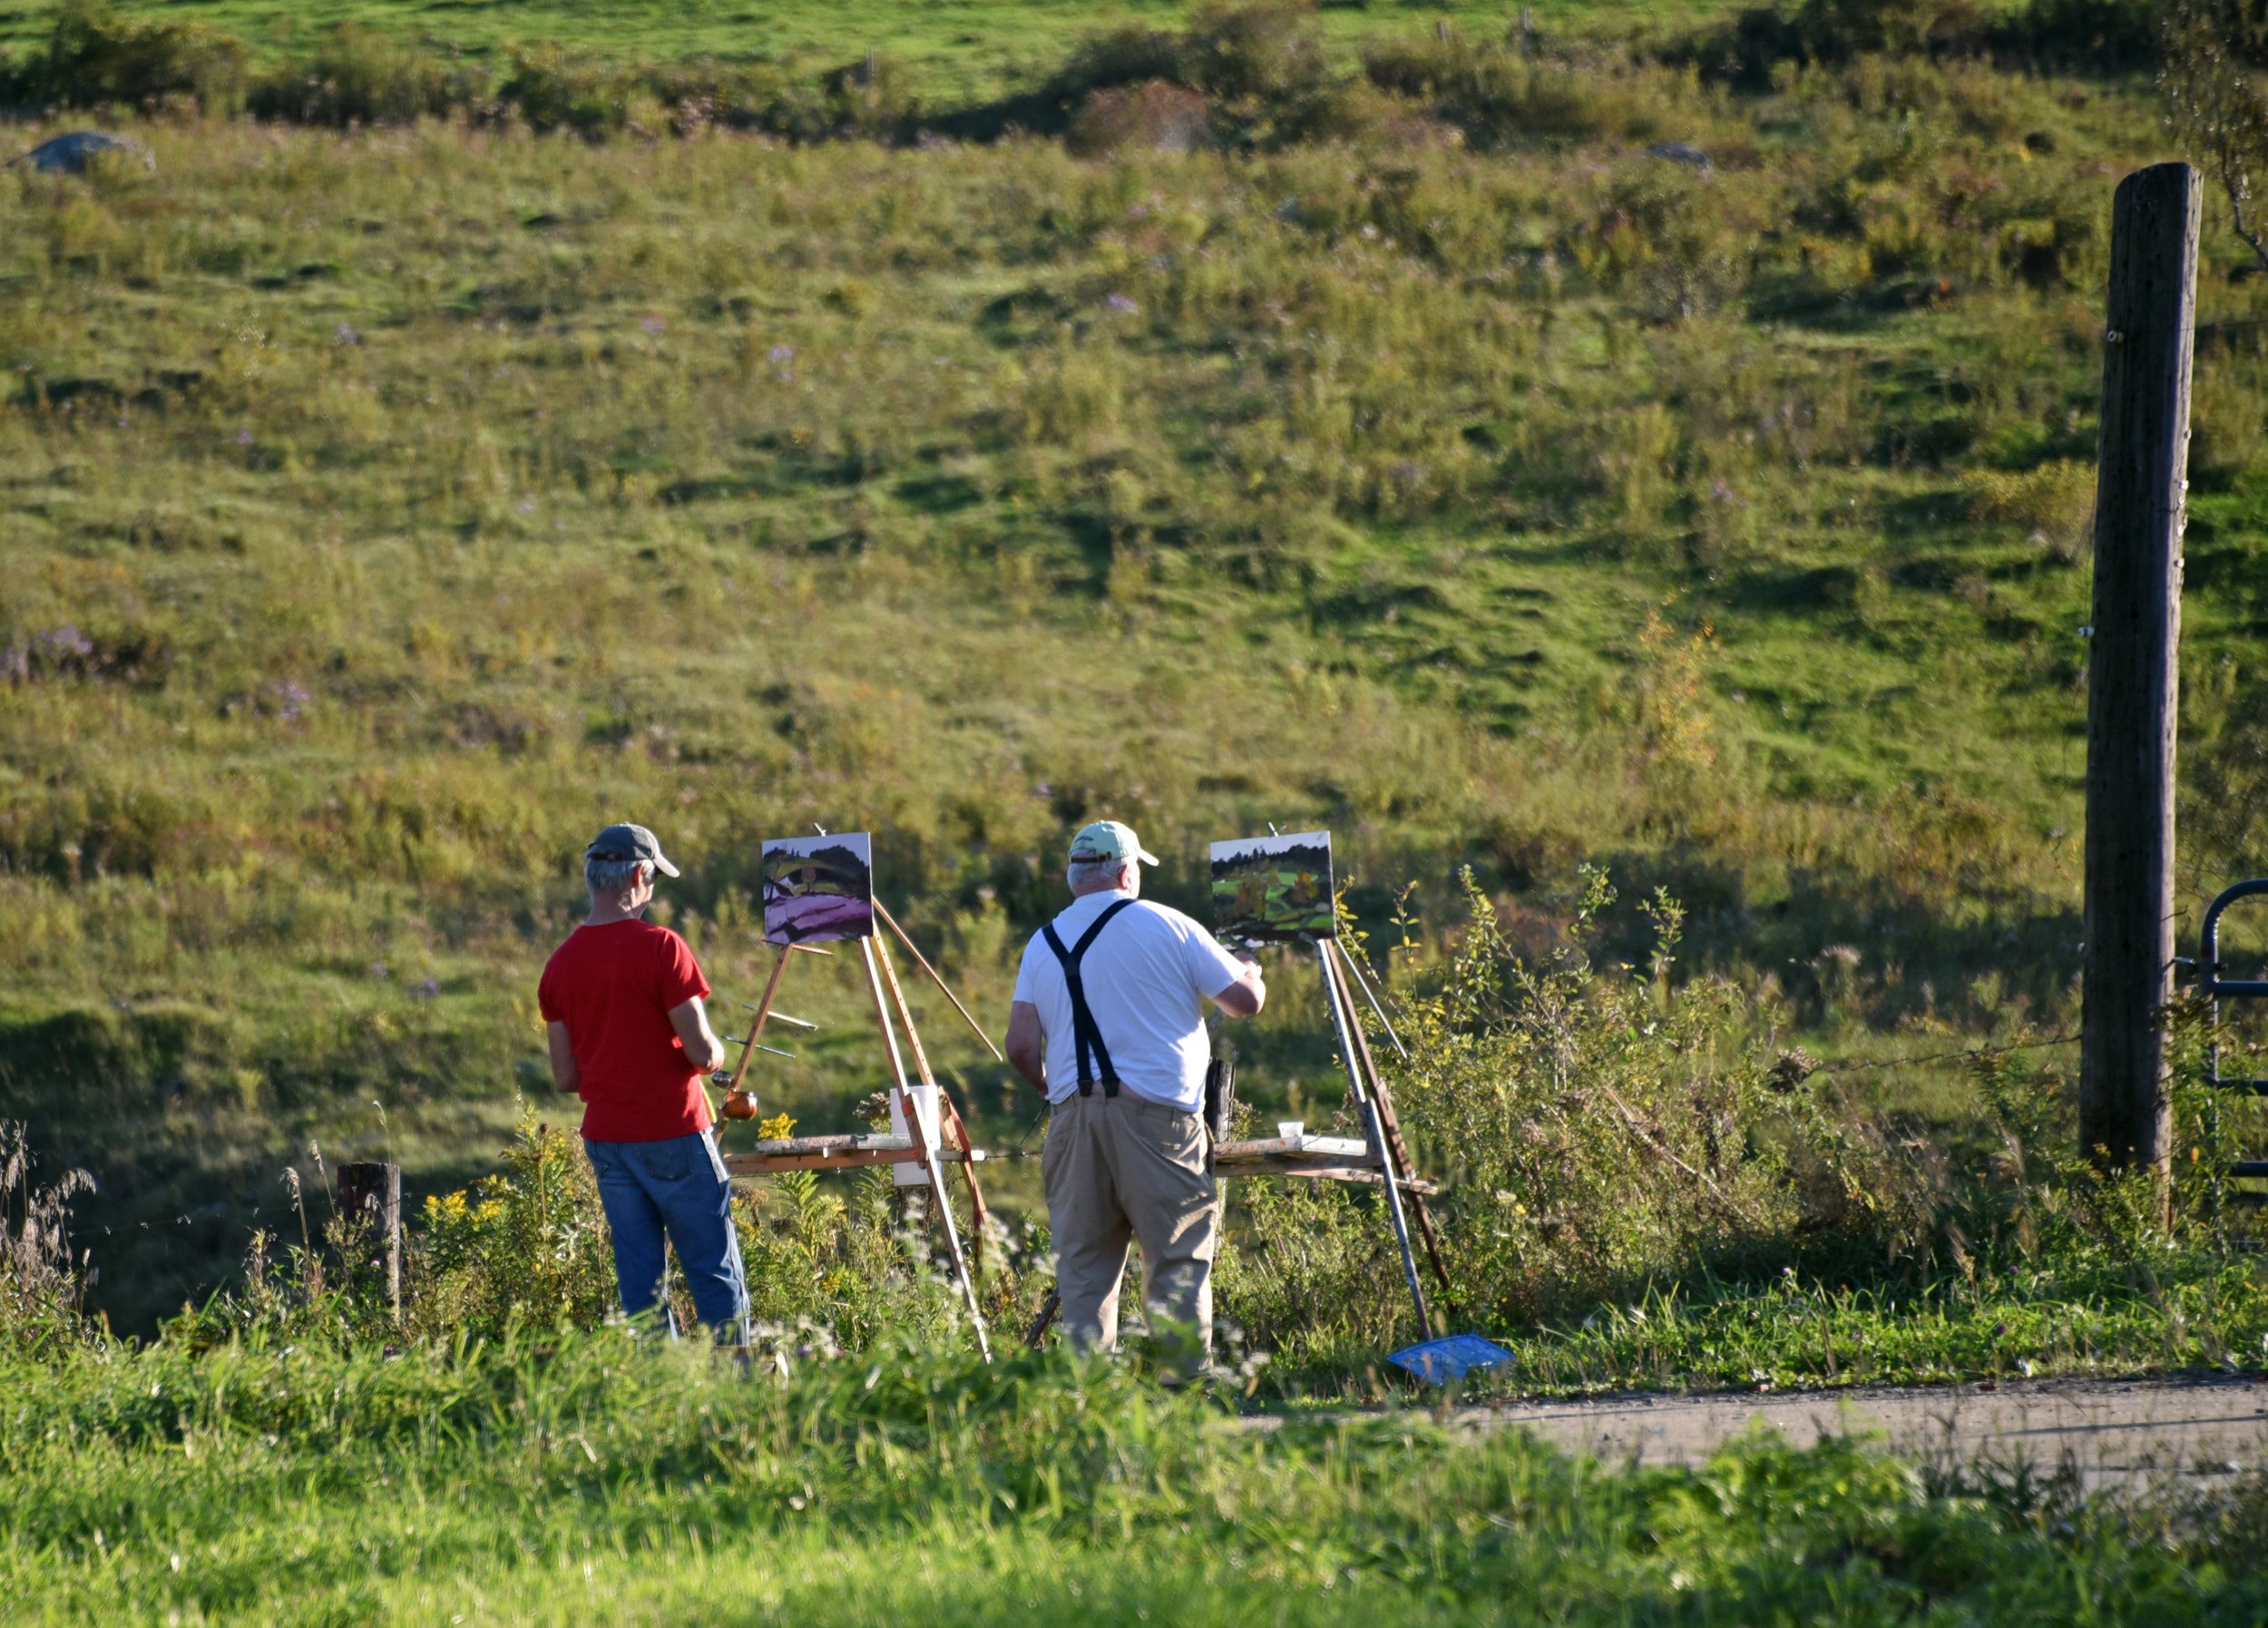   These painters find a quiet spot to create some art in the autumn sunshine on Perry Hill. Photo by Gordon Miller  